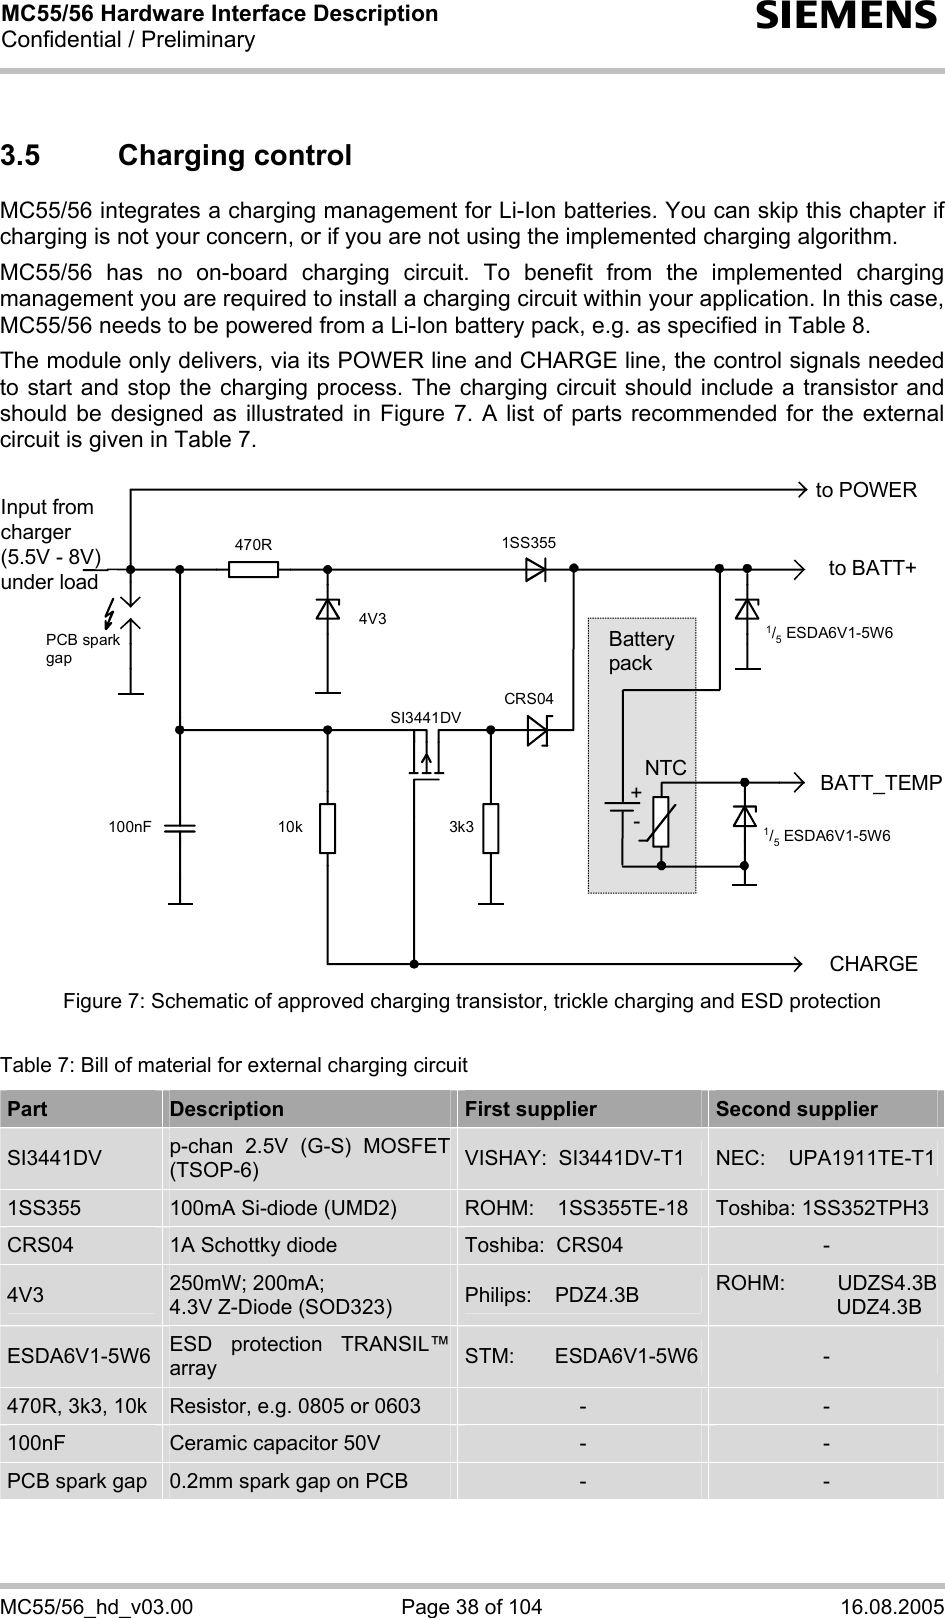 MC55/56 Hardware Interface Description Confidential / Preliminary s MC55/56_hd_v03.00  Page 38 of 104  16.08.2005 3.5 Charging control MC55/56 integrates a charging management for Li-Ion batteries. You can skip this chapter if charging is not your concern, or if you are not using the implemented charging algorithm.  MC55/56 has no on-board charging circuit. To benefit from the implemented charging management you are required to install a charging circuit within your application. In this case, MC55/56 needs to be powered from a Li-Ion battery pack, e.g. as specified in Table 8.  The module only delivers, via its POWER line and CHARGE line, the control signals needed to start and stop the charging process. The charging circuit should include a transistor and should be designed as illustrated in Figure 7. A list of parts recommended for the external circuit is given in Table 7.  to BATT+Input fromcharger(5.5V - 8V)under loadCHARGE470R 1SS3553k3100nF 10kSI3441DV4V3 1/5 ESDA6V1-5W6to POWERBATT_TEMP1/5 ESDA6V1-5W6NTC+Battery packPCB spark gapCRS04- Figure 7: Schematic of approved charging transistor, trickle charging and ESD protection  Table 7: Bill of material for external charging circuit Part  Description  First supplier  Second supplier SI3441DV  p-chan 2.5V (G-S) MOSFET (TSOP-6)  VISHAY:  SI3441DV-T1  NEC:    UPA1911TE-T11SS355  100mA Si-diode (UMD2)  ROHM:    1SS355TE-18  Toshiba: 1SS352TPH3 CRS04  1A Schottky diode   Toshiba:  CRS04  - 4V3  250mW; 200mA; 4.3V Z-Diode (SOD323)  Philips:    PDZ4.3B  ROHM: UDZS4.3B                     UDZ4.3B ESDA6V1-5W6  ESD protection TRANSIL™ array  STM:       ESDA6V1-5W6  - 470R, 3k3, 10k  Resistor, e.g. 0805 or 0603  -  - 100nF  Ceramic capacitor 50V  -  - PCB spark gap  0.2mm spark gap on PCB  -  - 